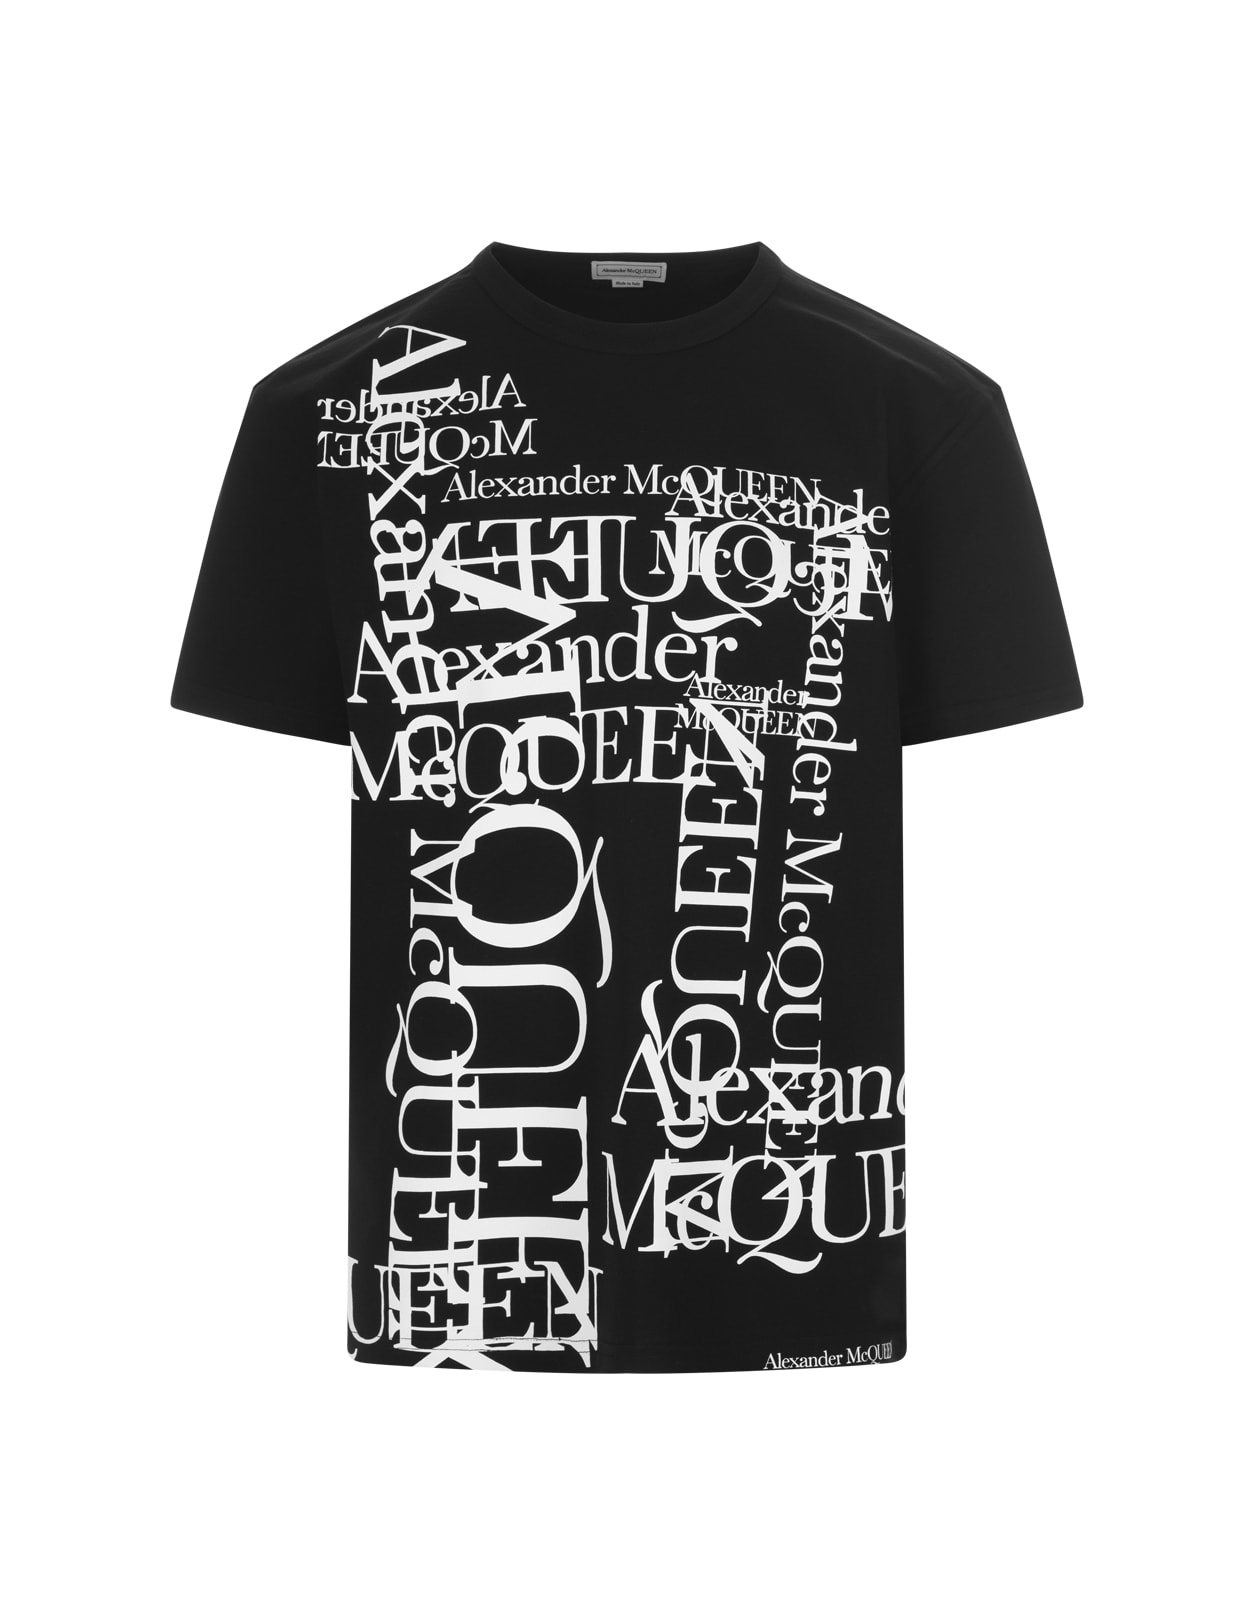 ALEXANDER MCQUEEN BLACK T-SHIRT WITH WHITE LETTERING LOGO ON CHEST